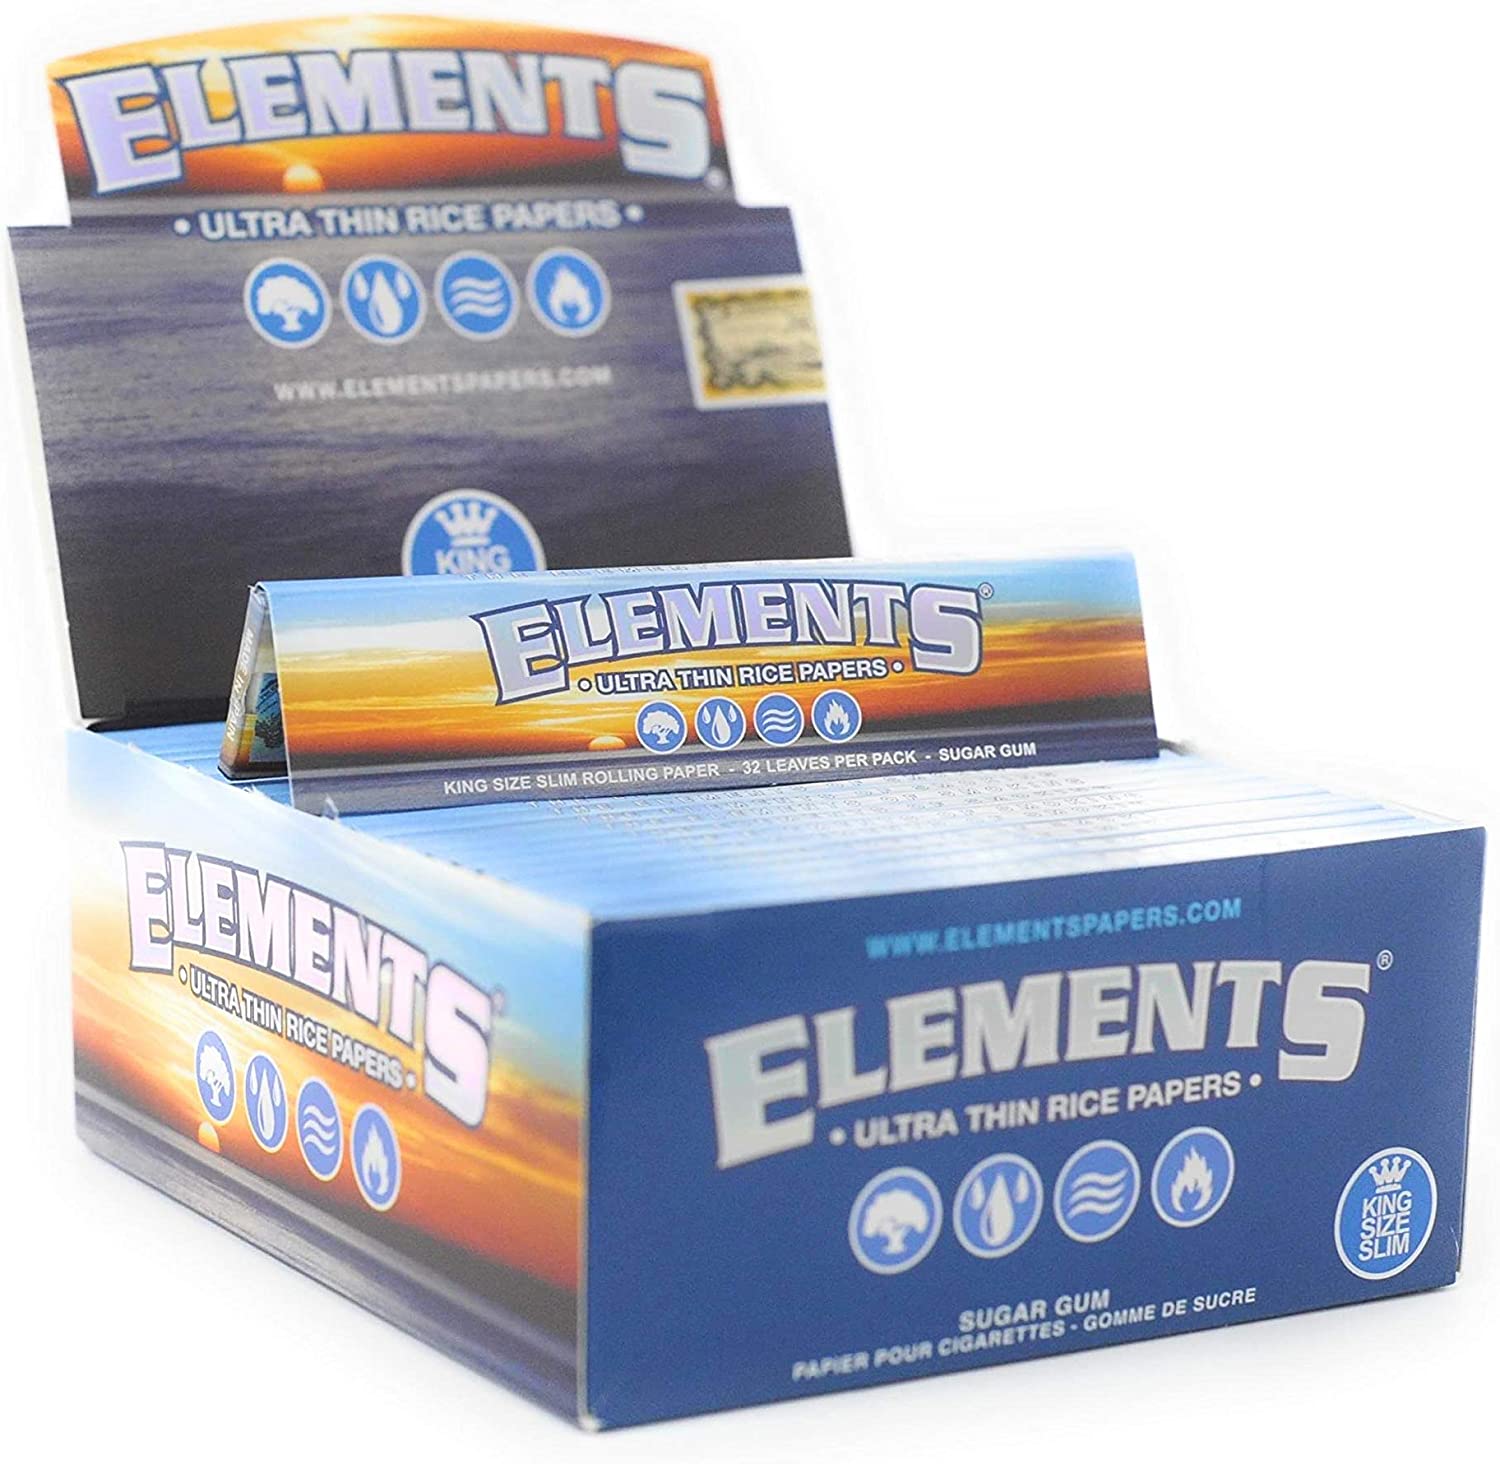 Elements Papers King Size Slim (50x)